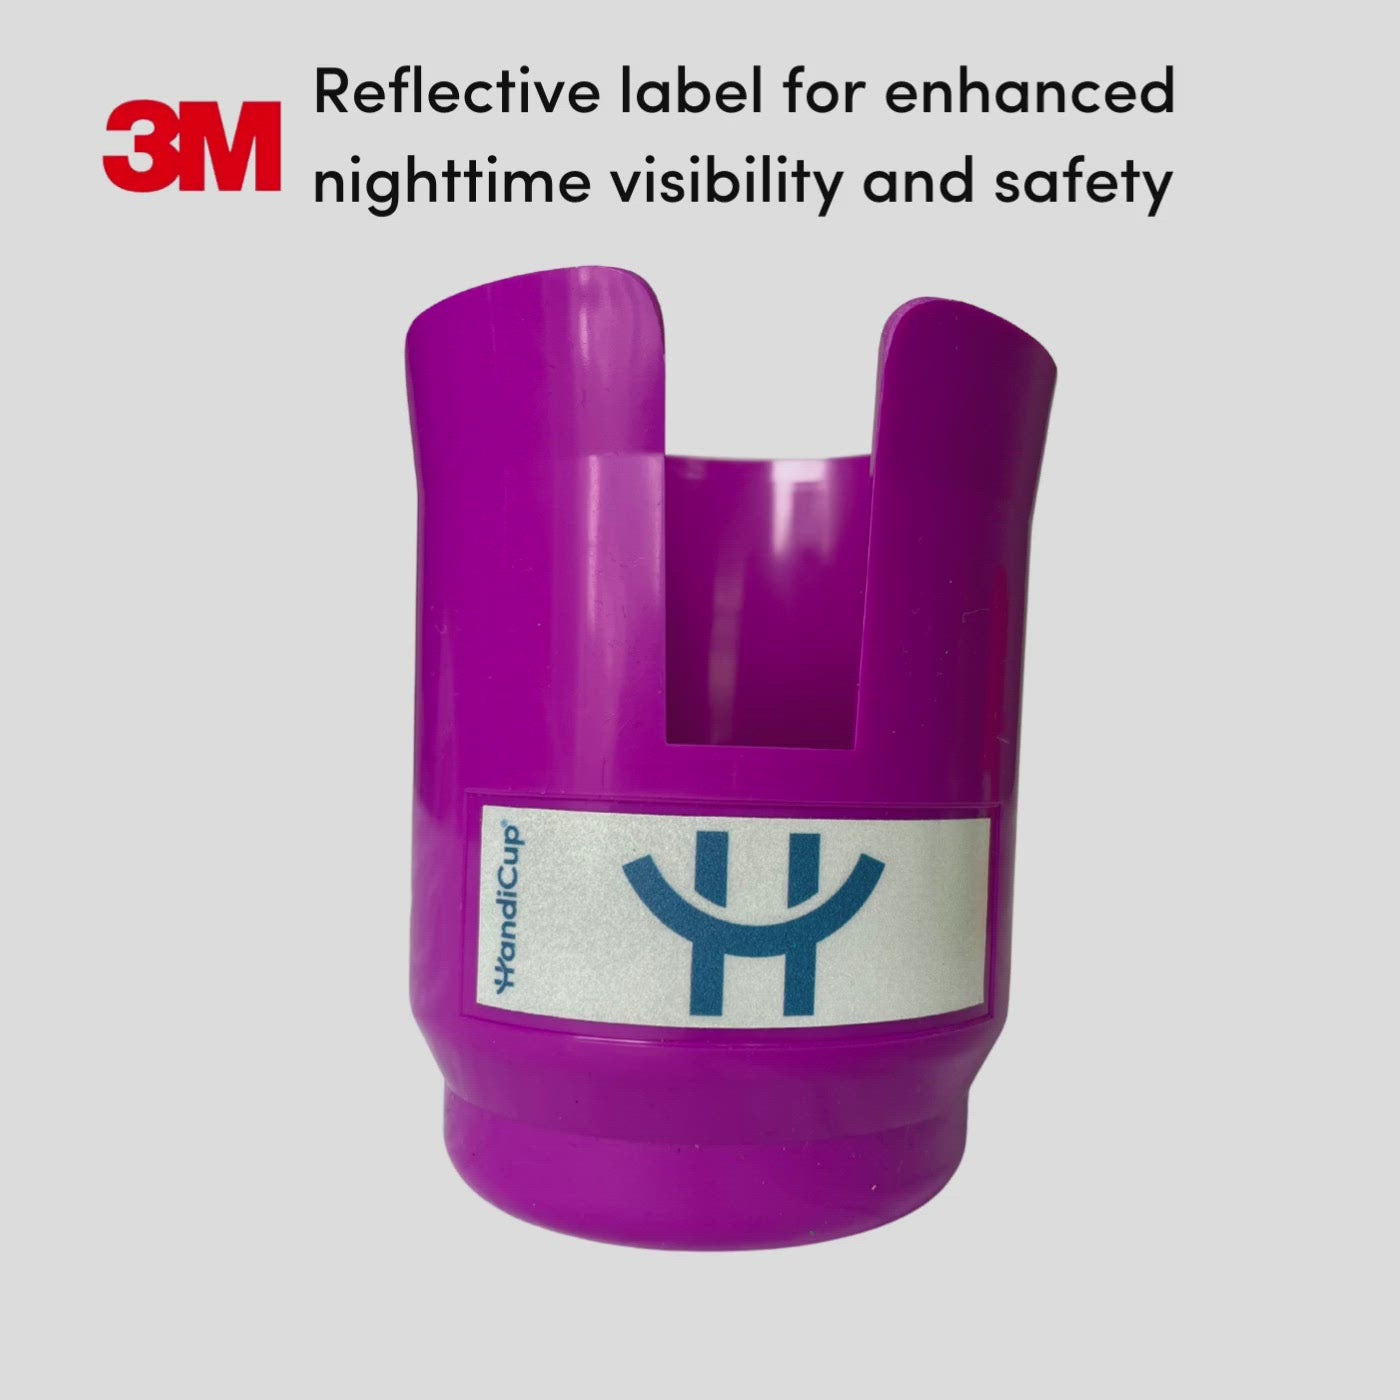 3m reflective label on HandiCup. When light shines on the label it becomes bright and visible for added nighttime safety